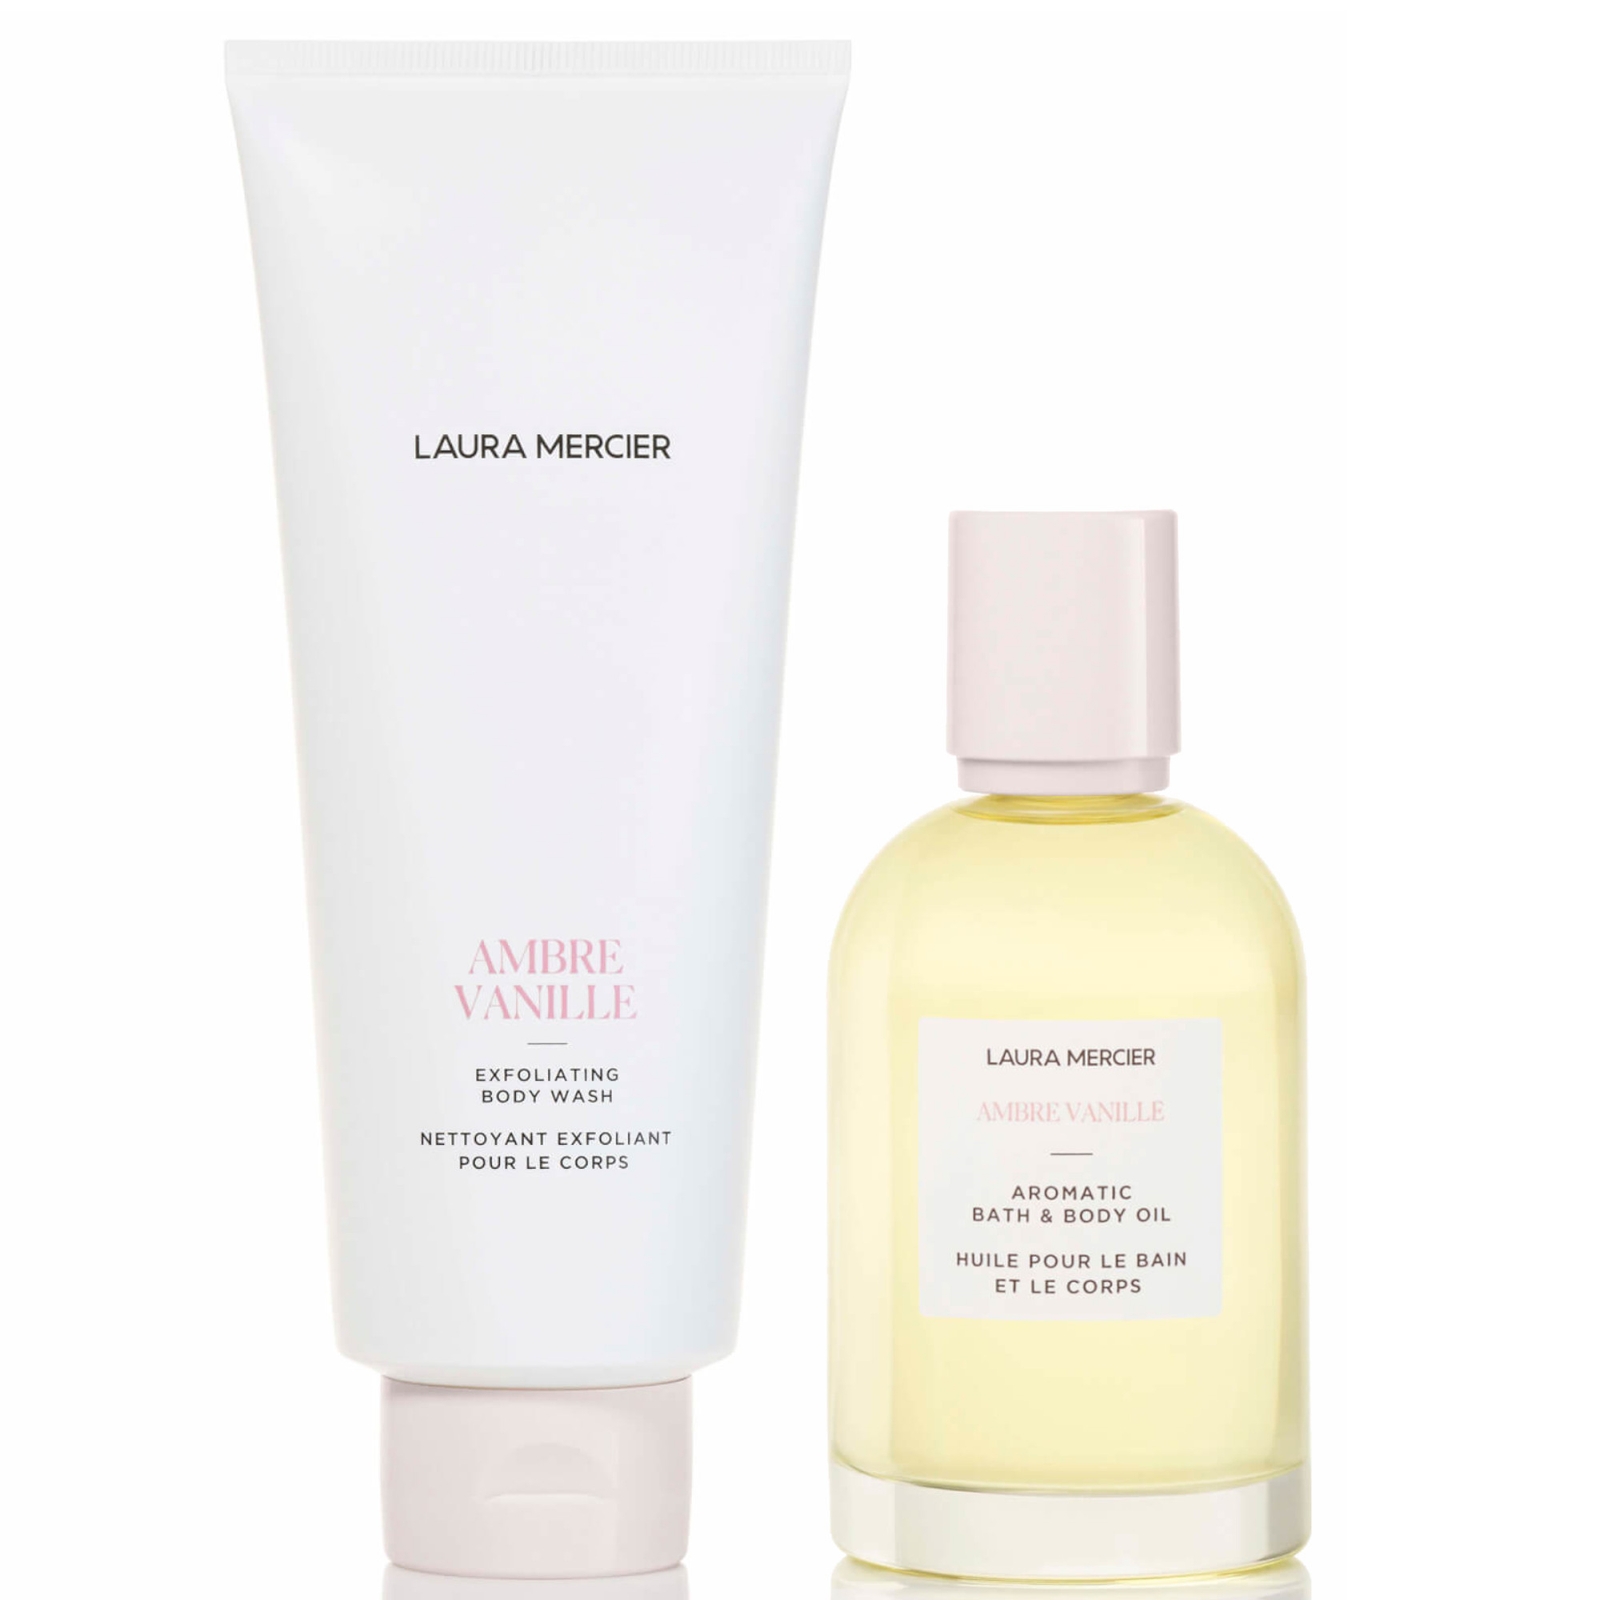 Image of Laura Mercier Ambre Vanille Exfoliating Body Wash and Bath and Body Oil Bundle